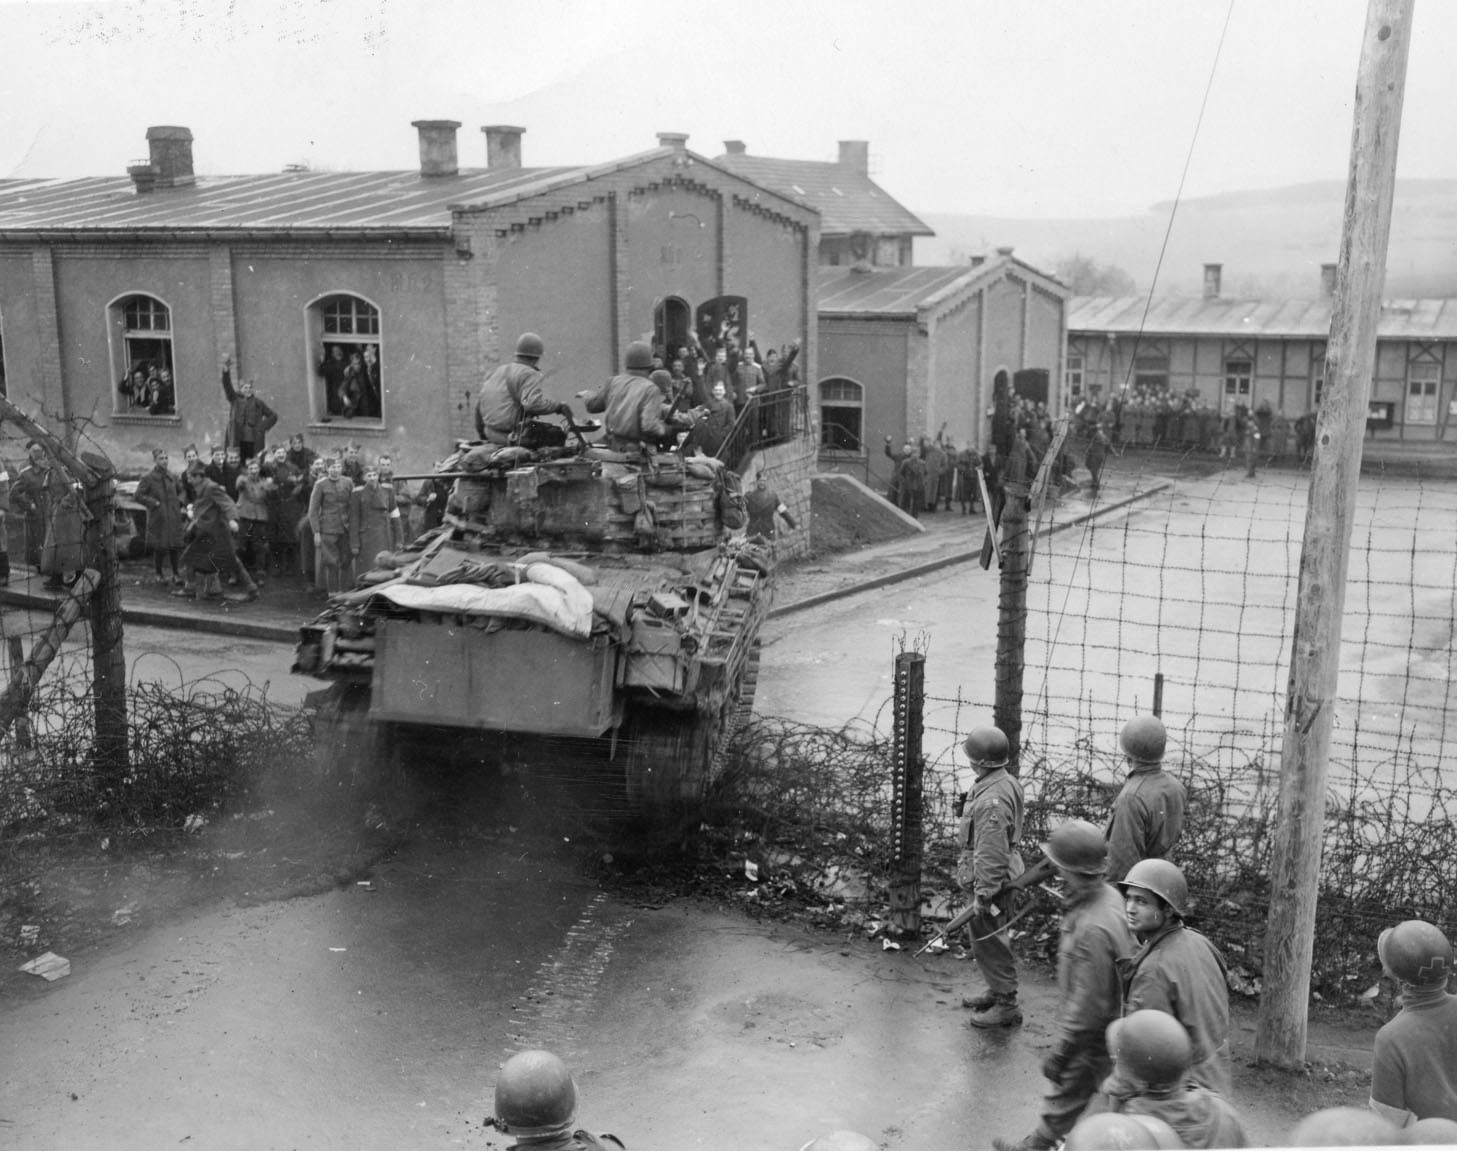 An American Sherman tank of Task Force Baum crashes through a gate at the Hammelburg POW camp during Patton’s abortive attempt to rescue American soldiers and his son-in-law, Lt. Col. John K. Waters. Thomas Flynn was one of the POWs held at Hammelburg.